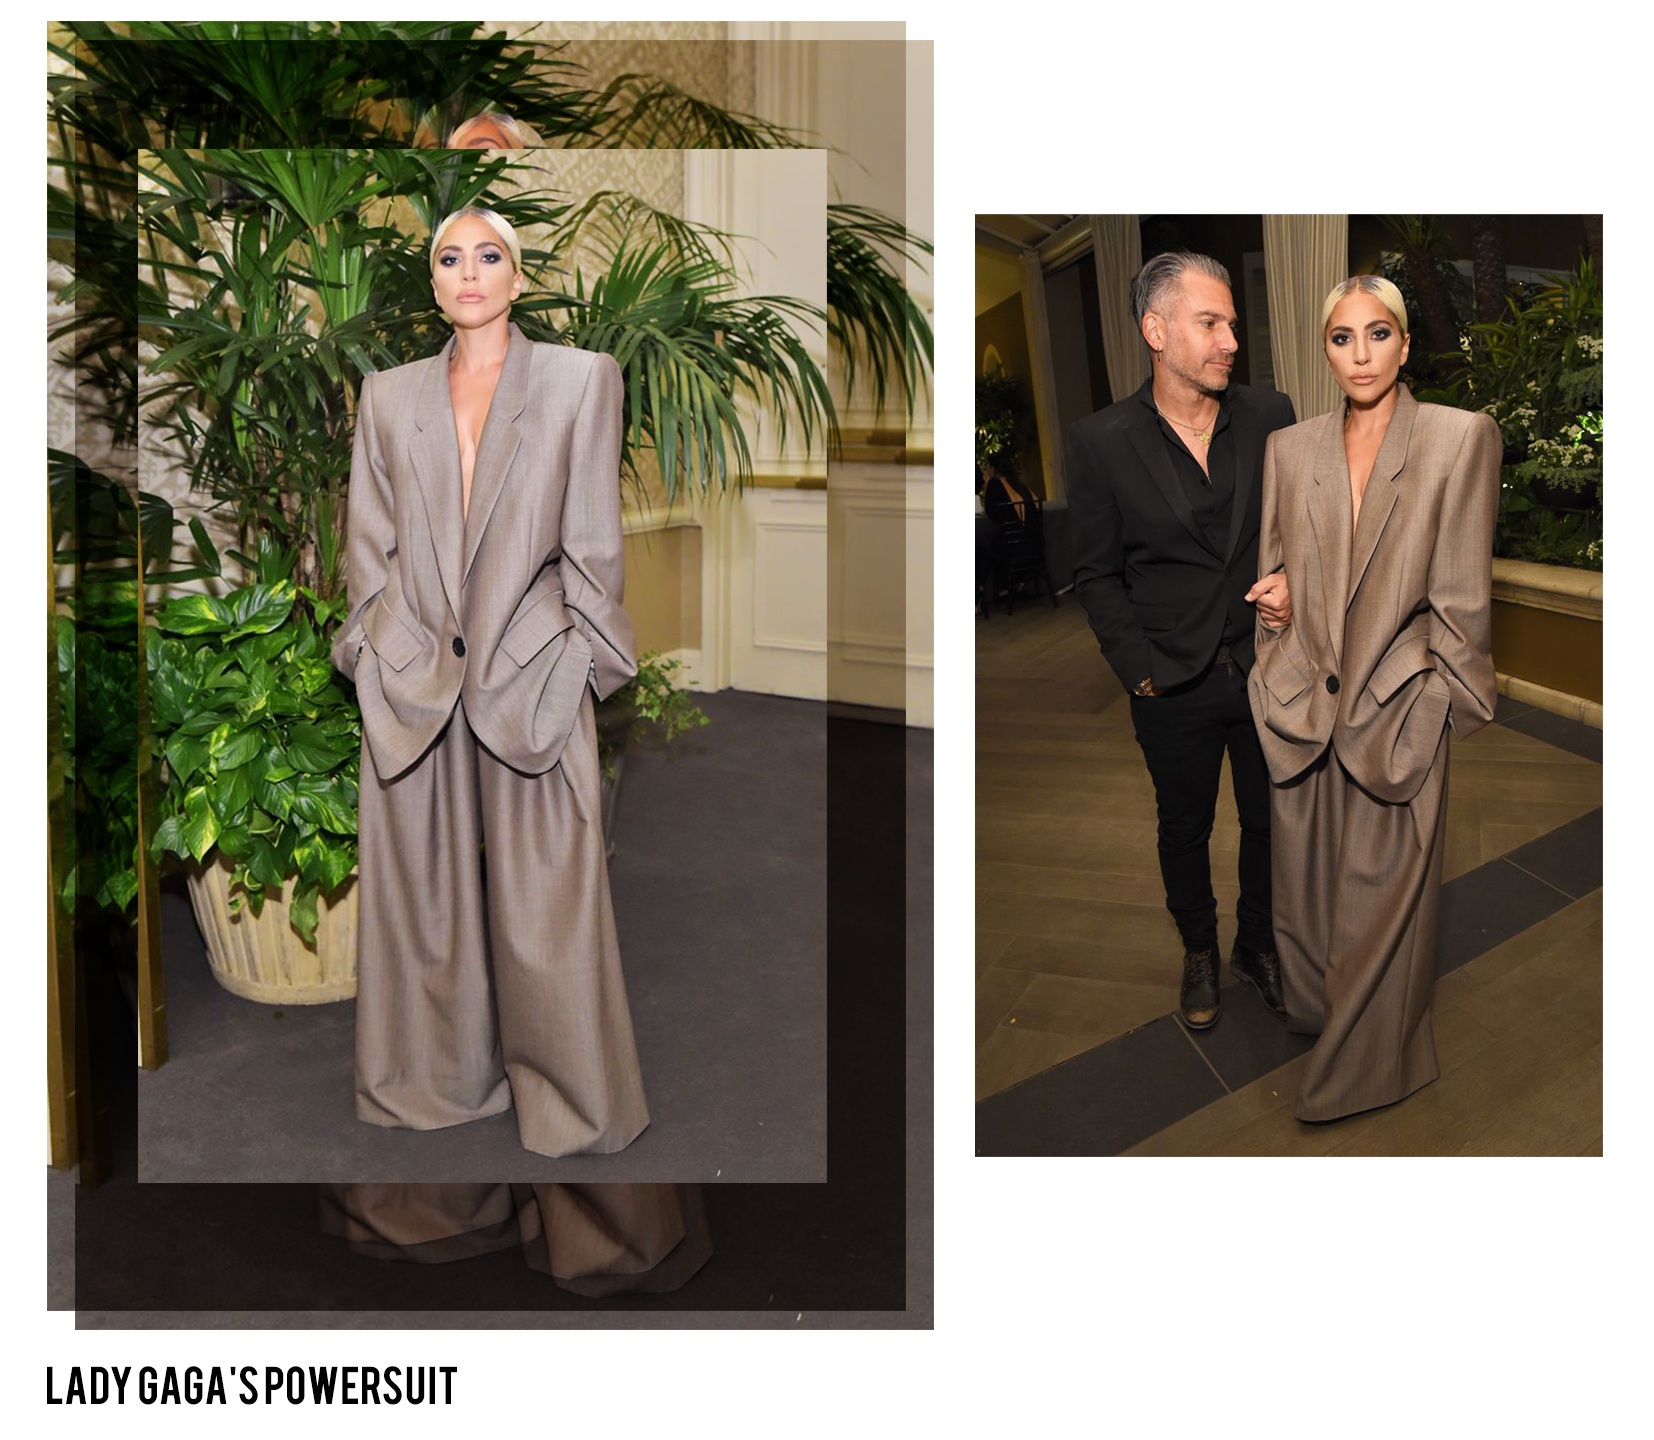 Lady Gaga wearing a statement power suit consisting of a blazer and wide leg trousers